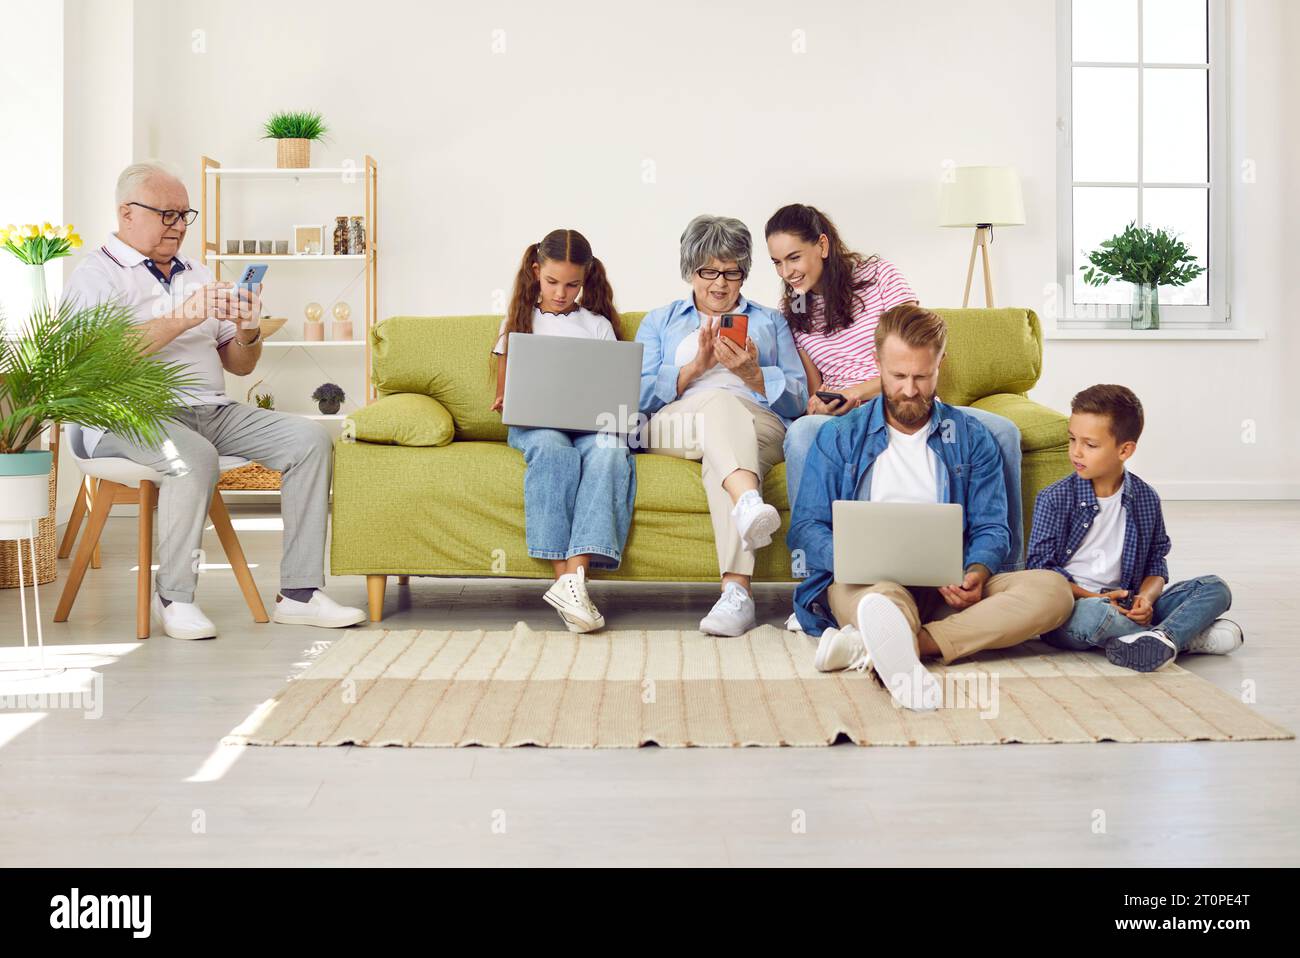 Big family sitting in living room with gadgets, parents, grandparents and two children. Stock Photo